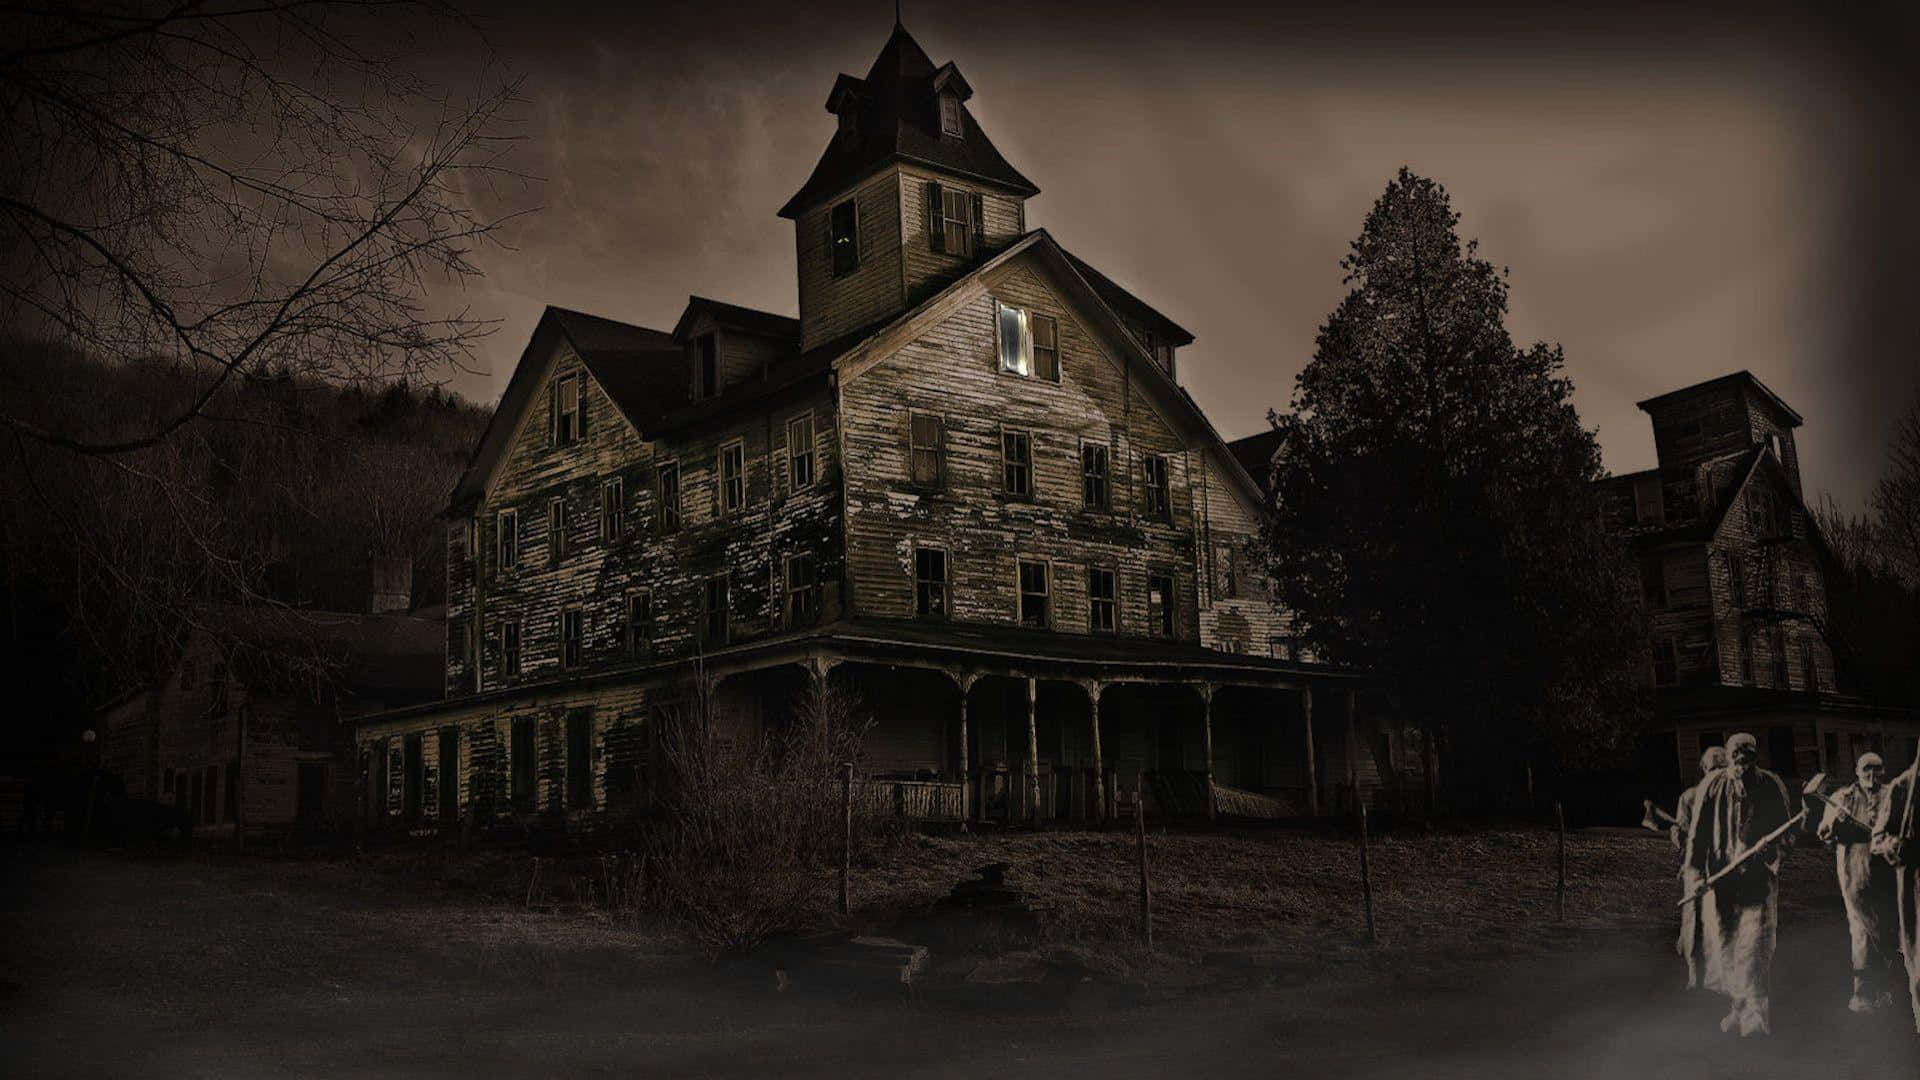 Spend the night in this Mysterious Haunted House